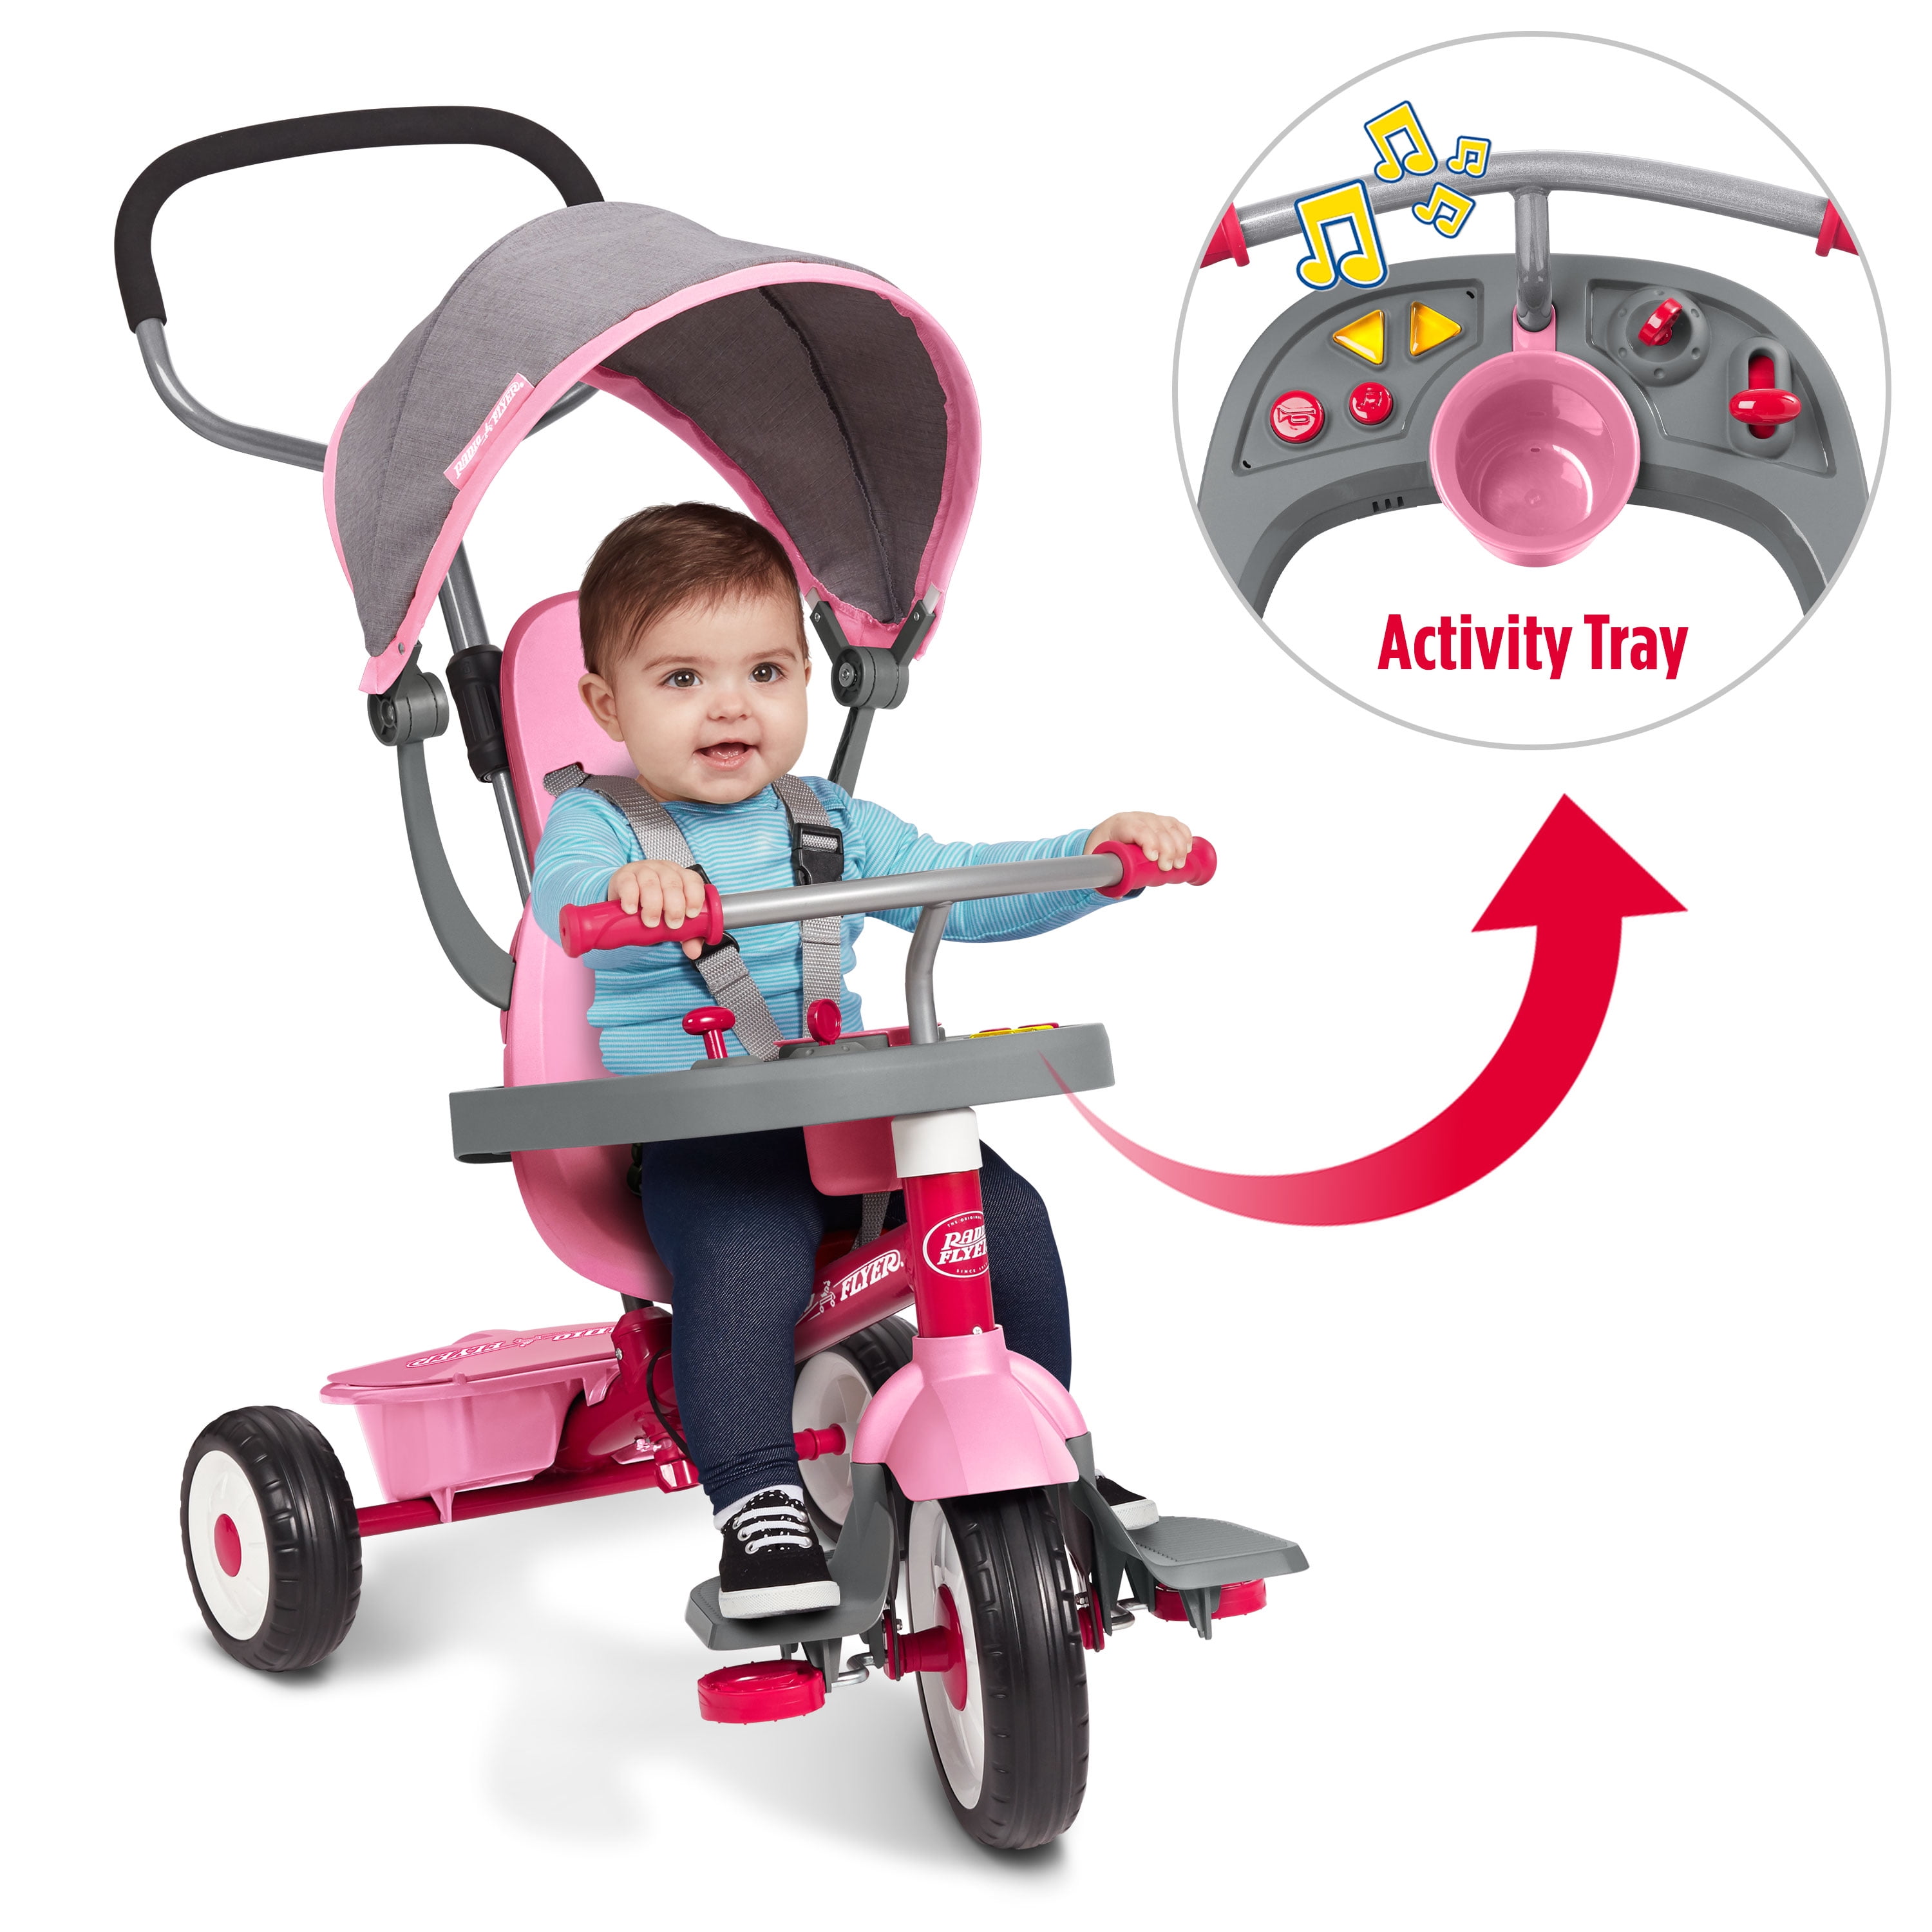 Radio Flyer, 4-in-1 Stroll 'N Trike with Activity Tray, Pink & Gray, Tricycle